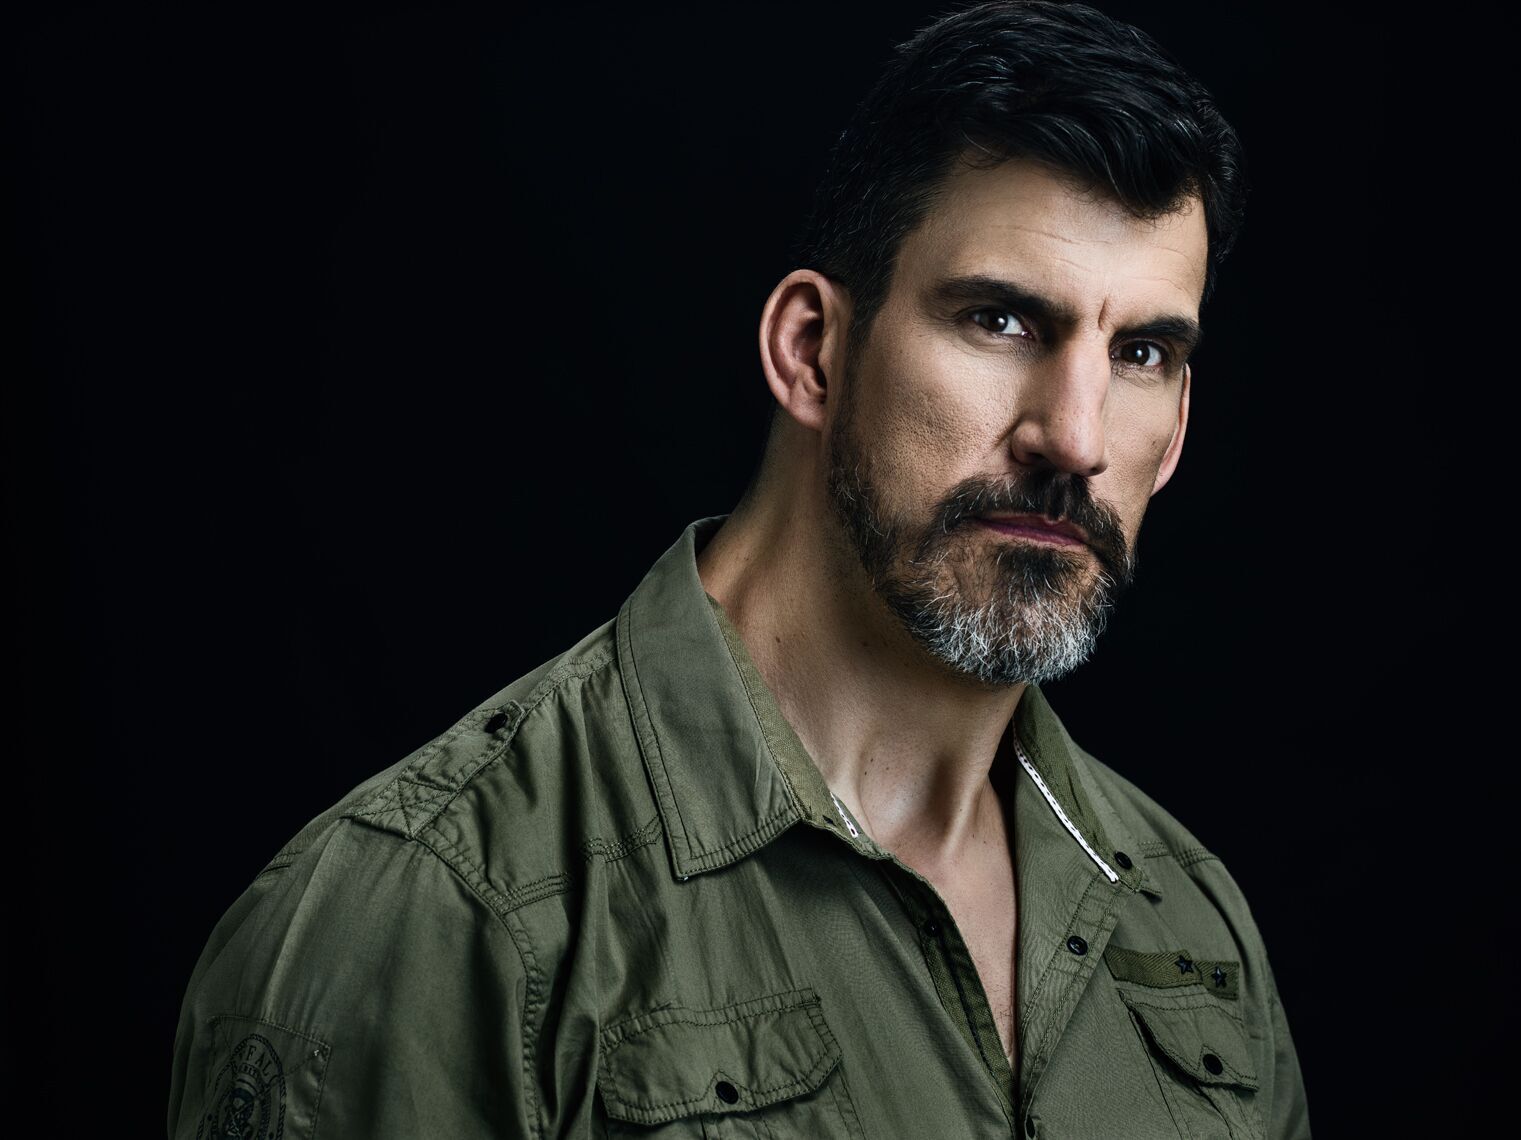 How tall is Robert Maillet?